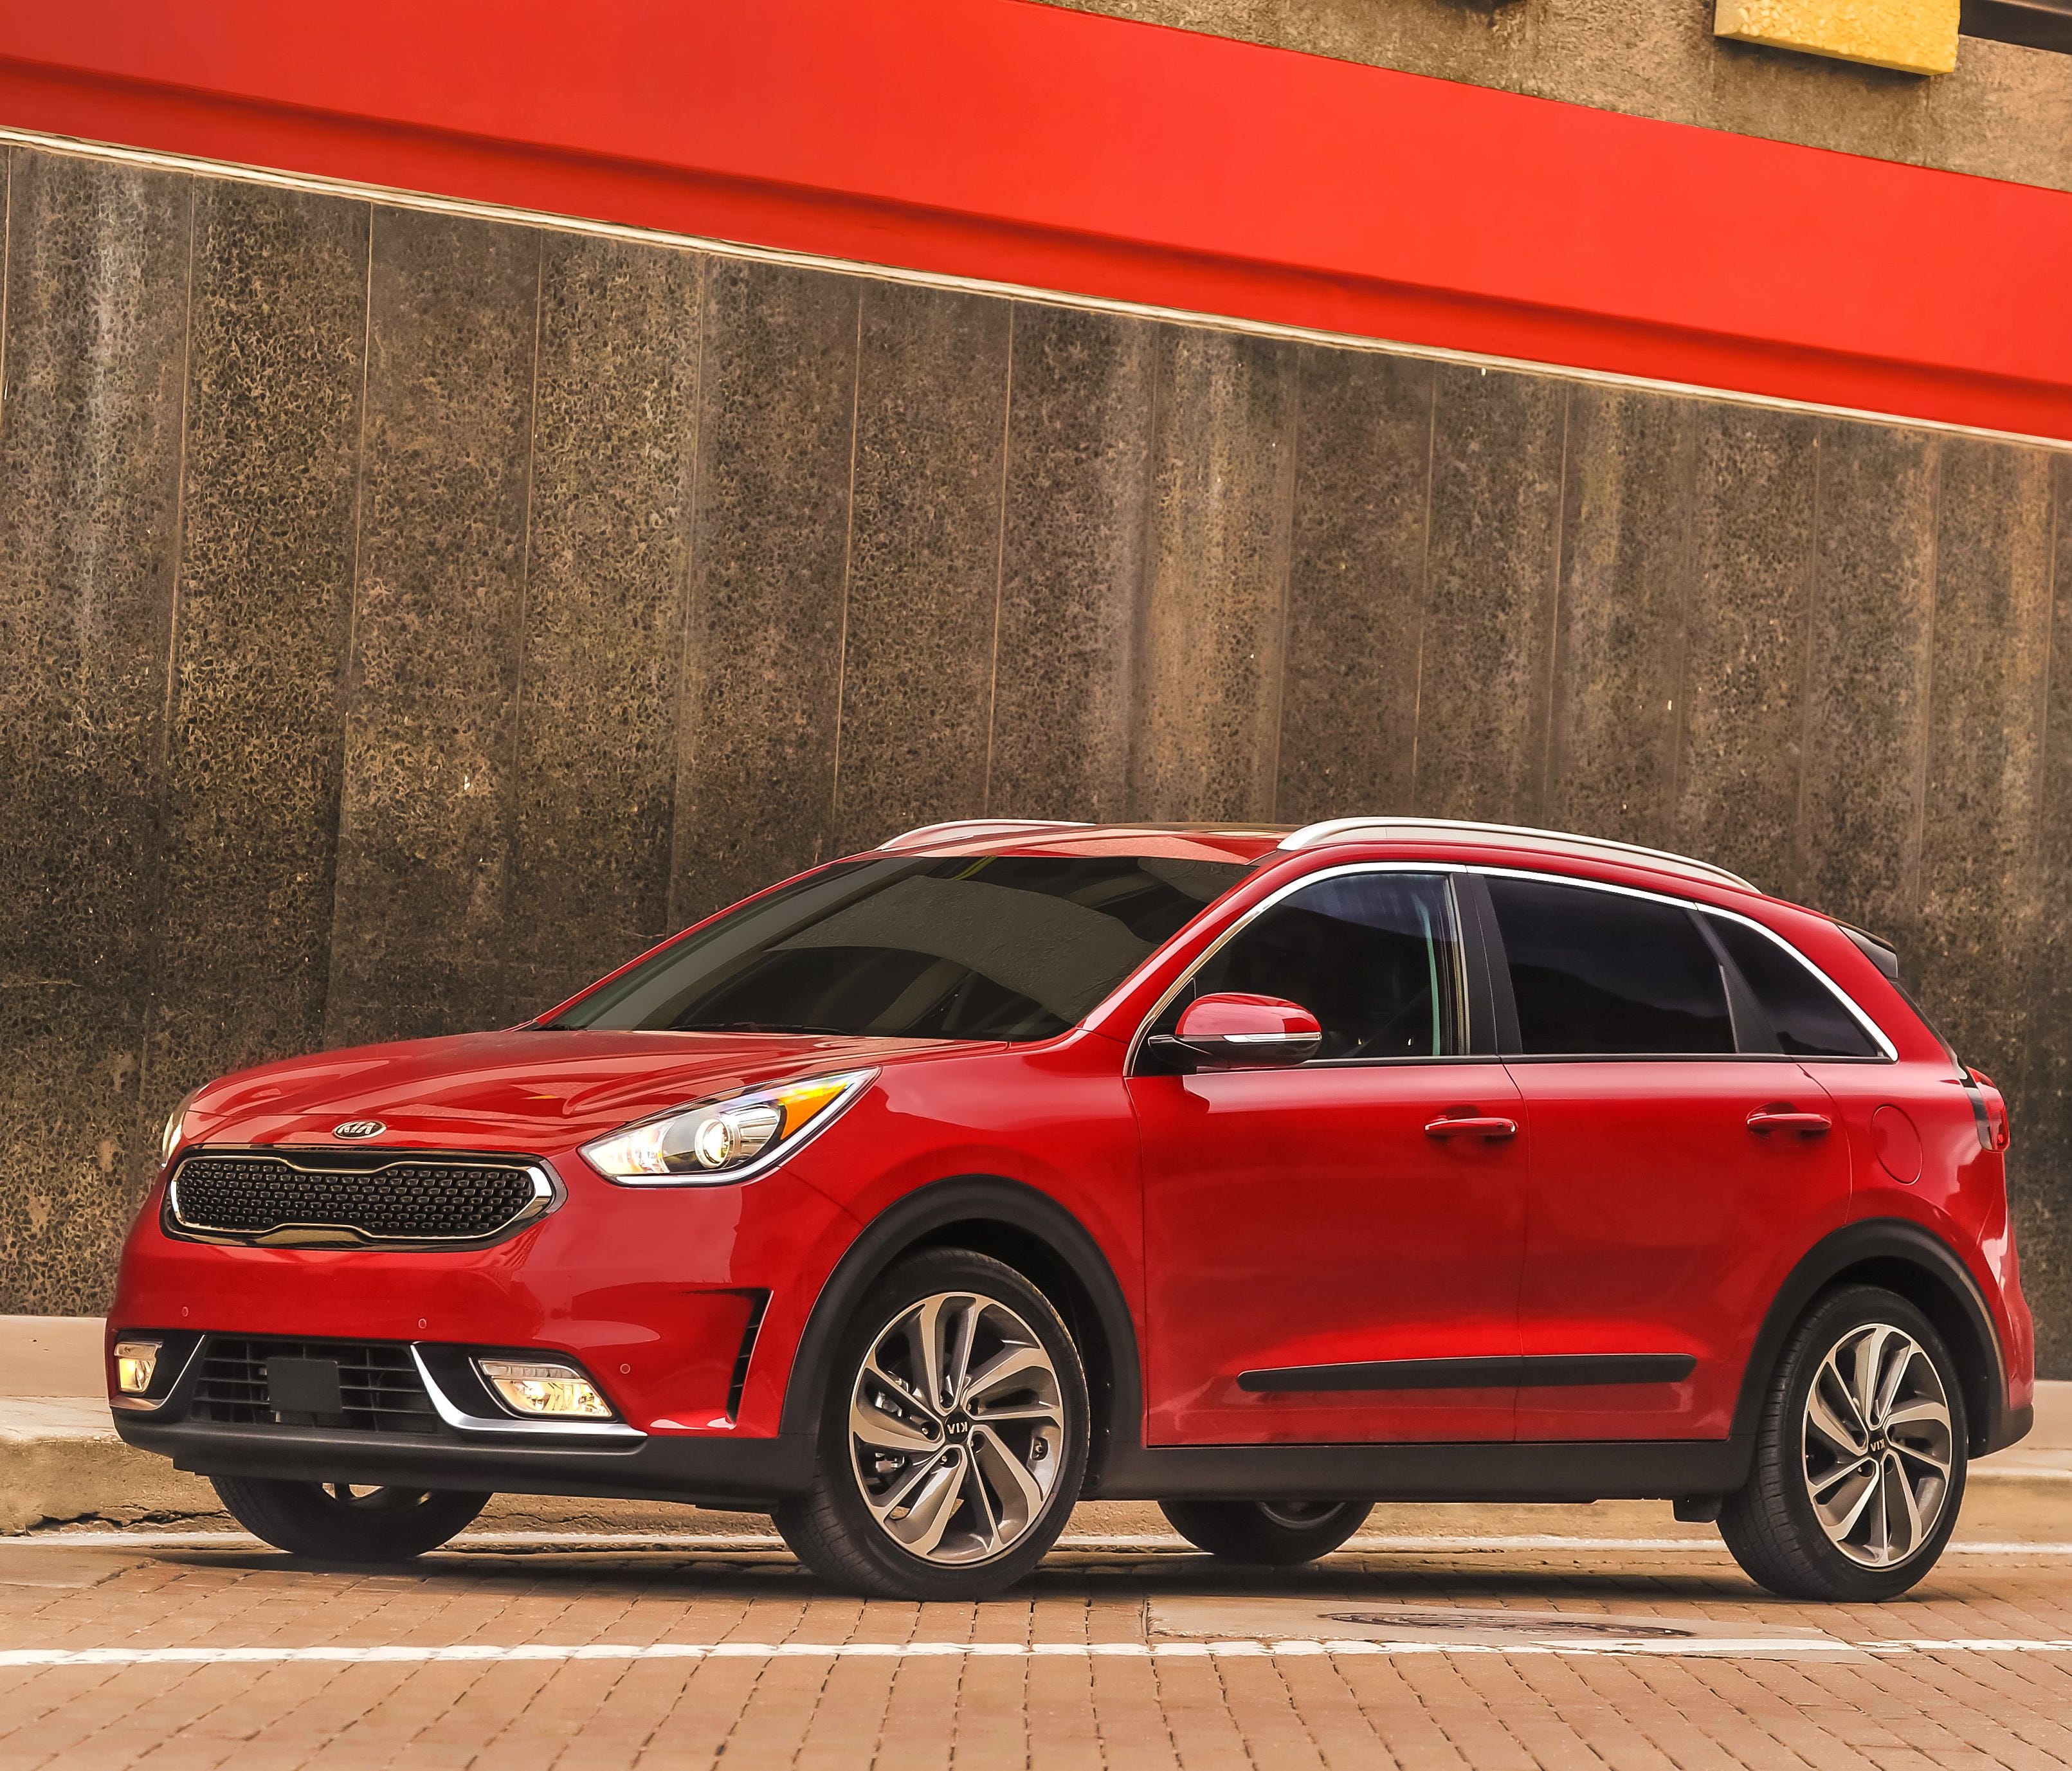 Kia is third and this is the  Niro